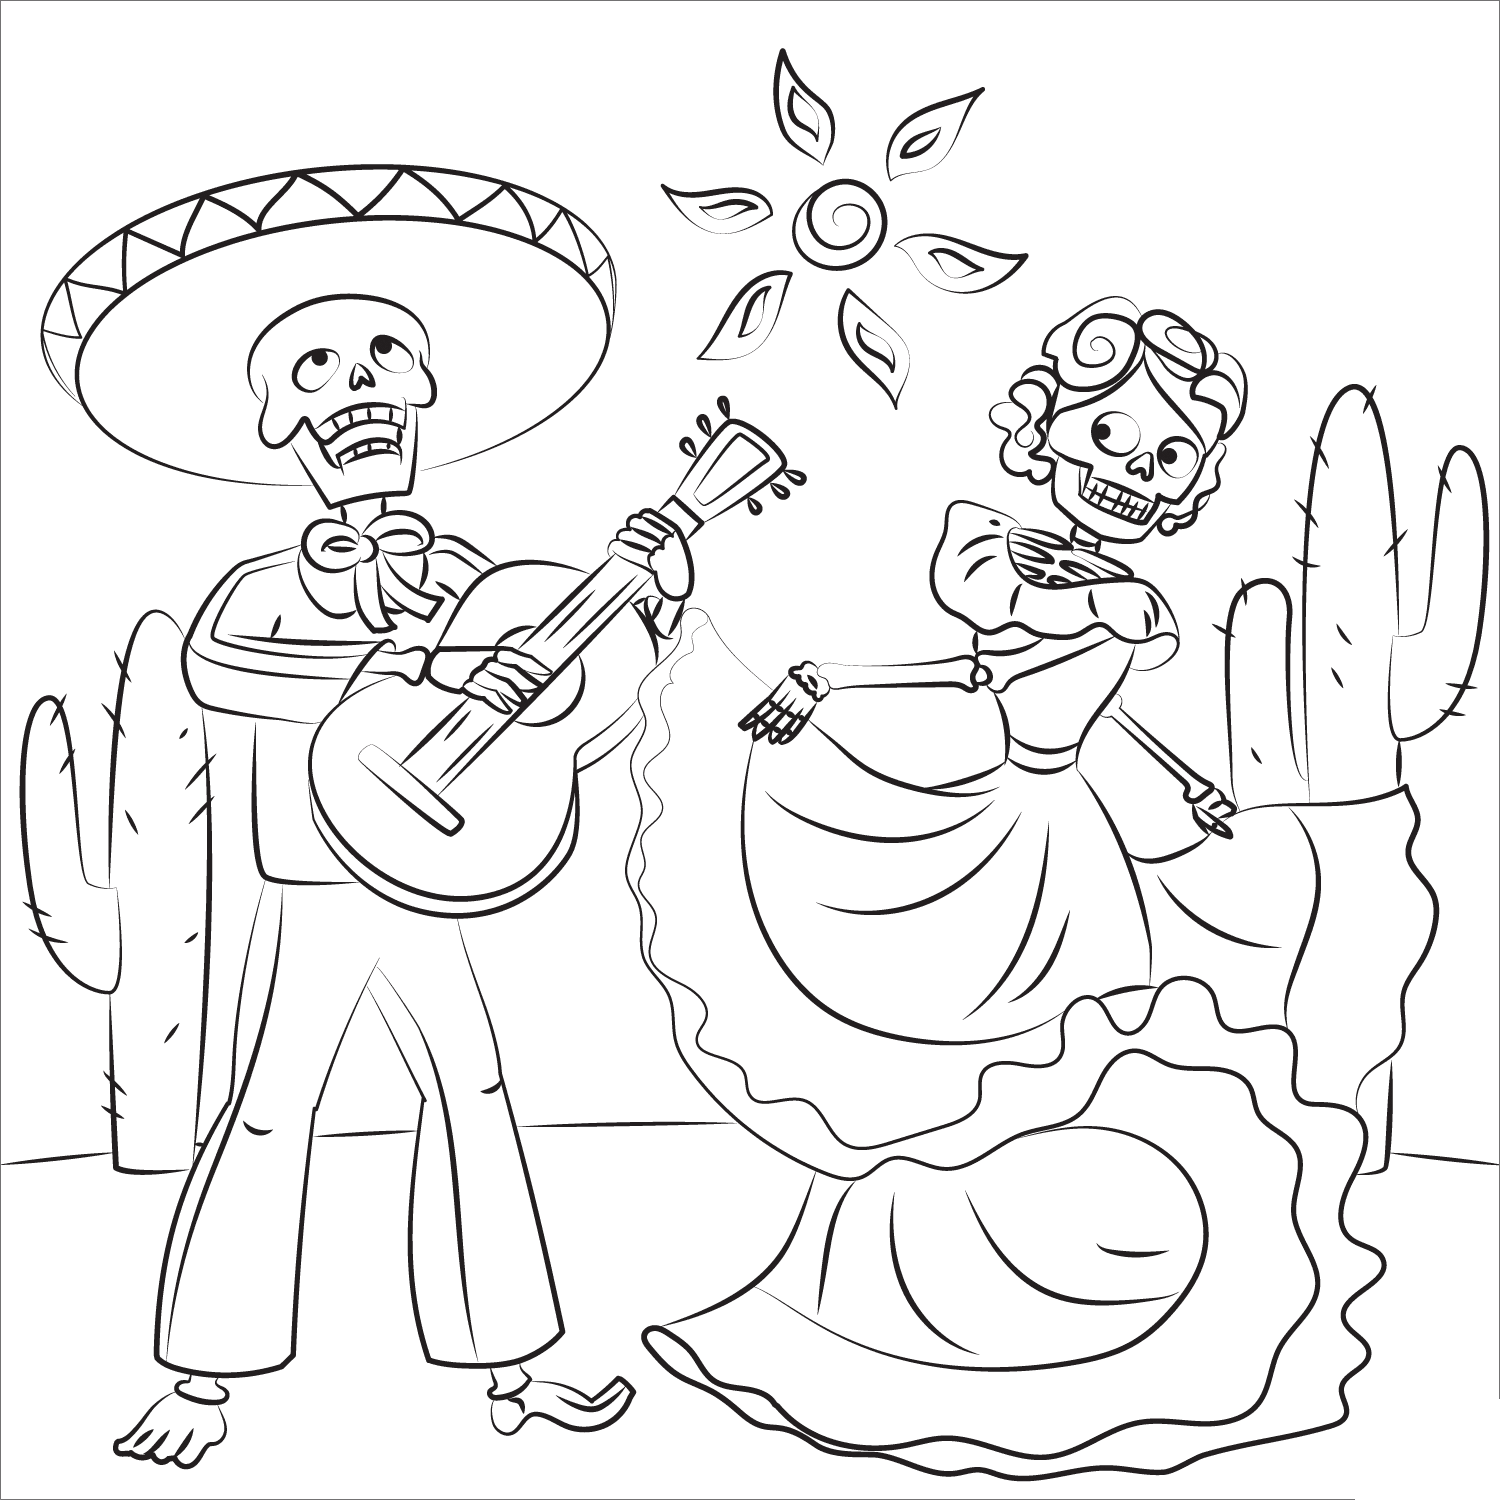 Skeleton Playing Guitar and Skeleton Woman Dancing from Day Of The Dead